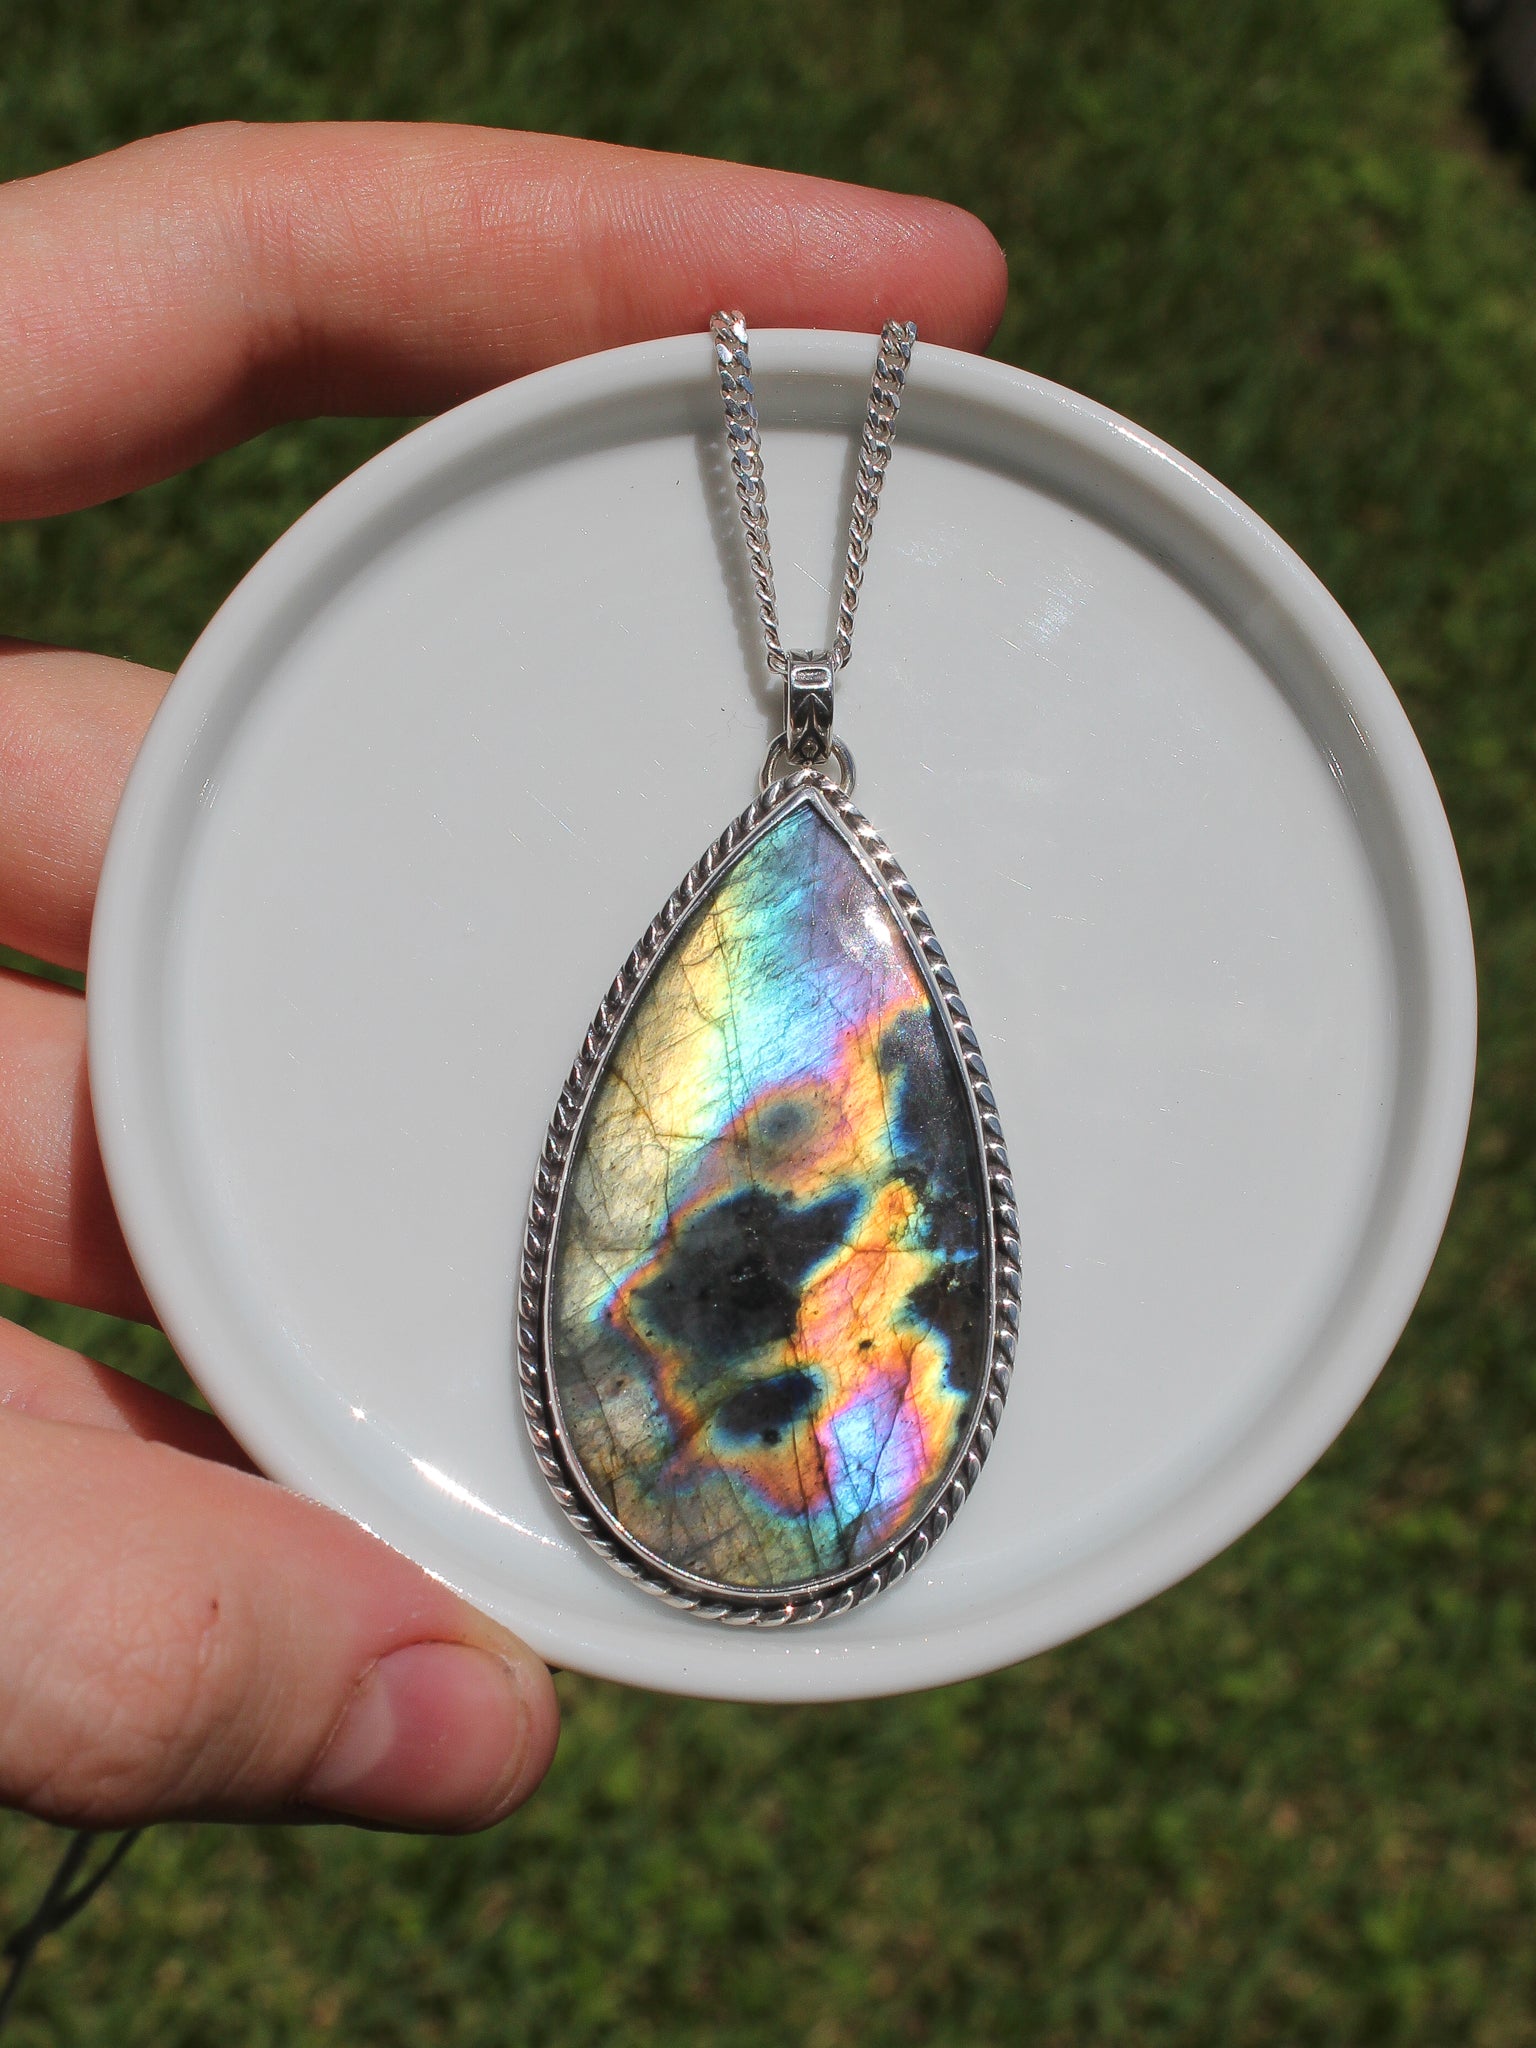 Handmade 925 sterling silver pendant with flashy labradorite stone lily and William jewelry